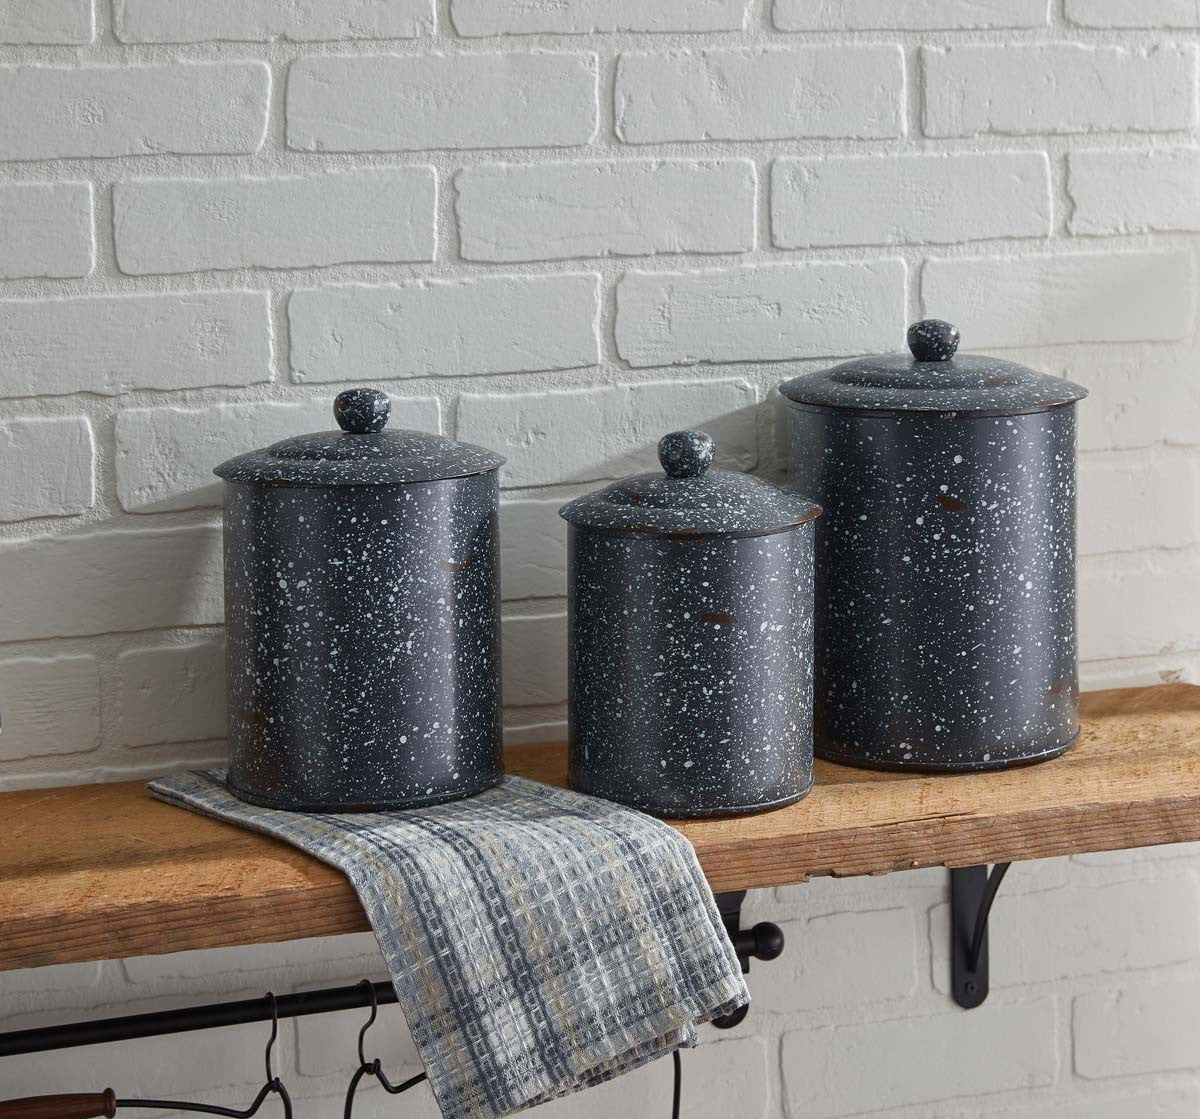 Park Designs Granite Enamelware Canisters Set Gray Excellent Quality